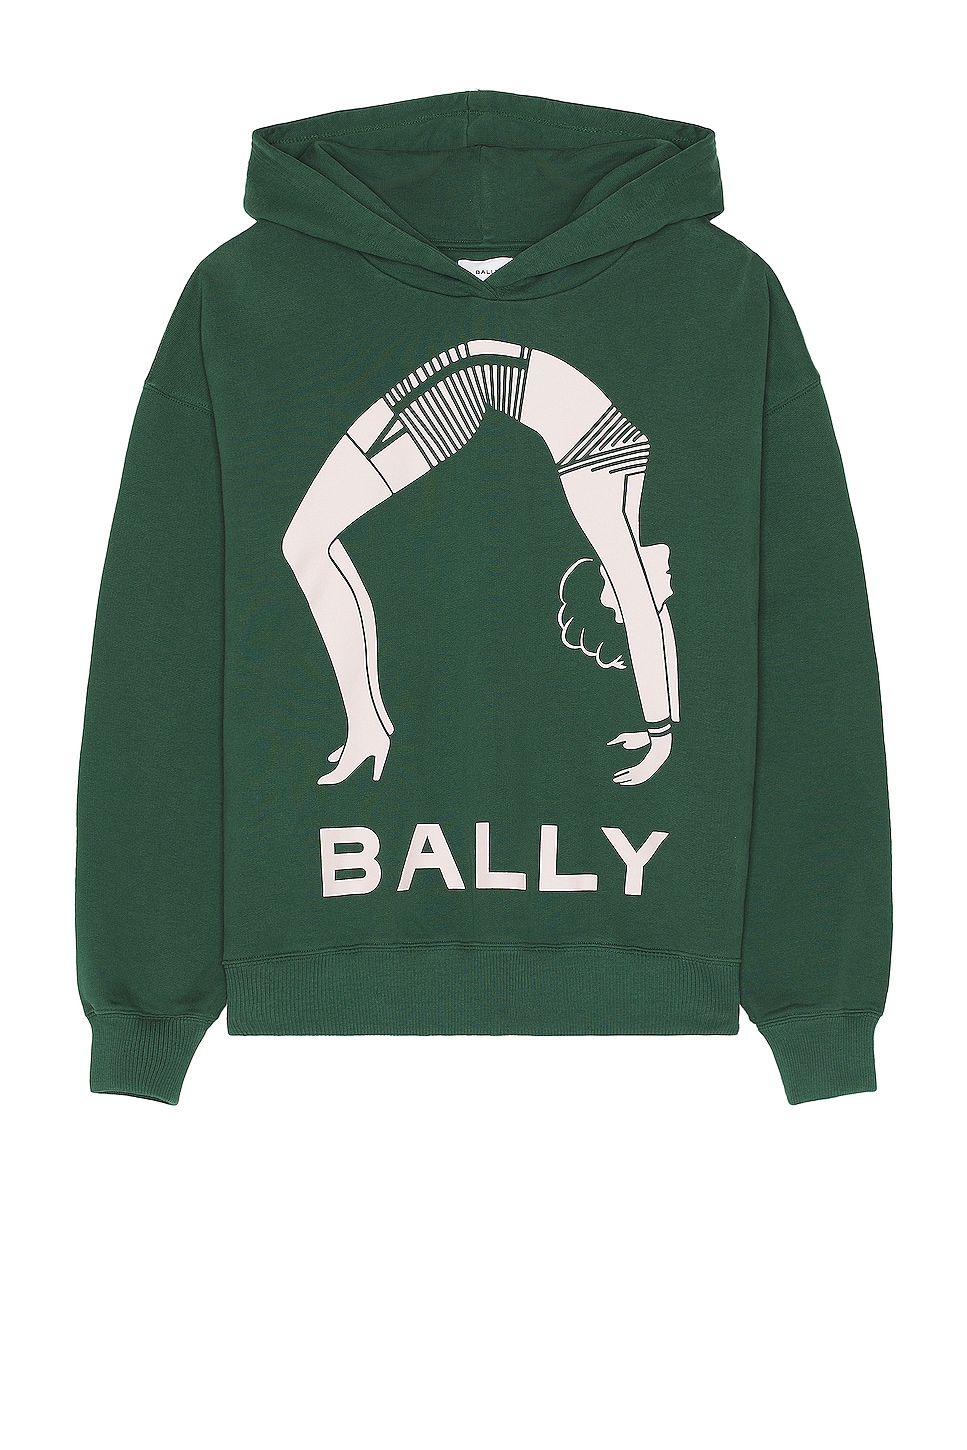 Image 1 of Bally Sweater in Kelly Green 23